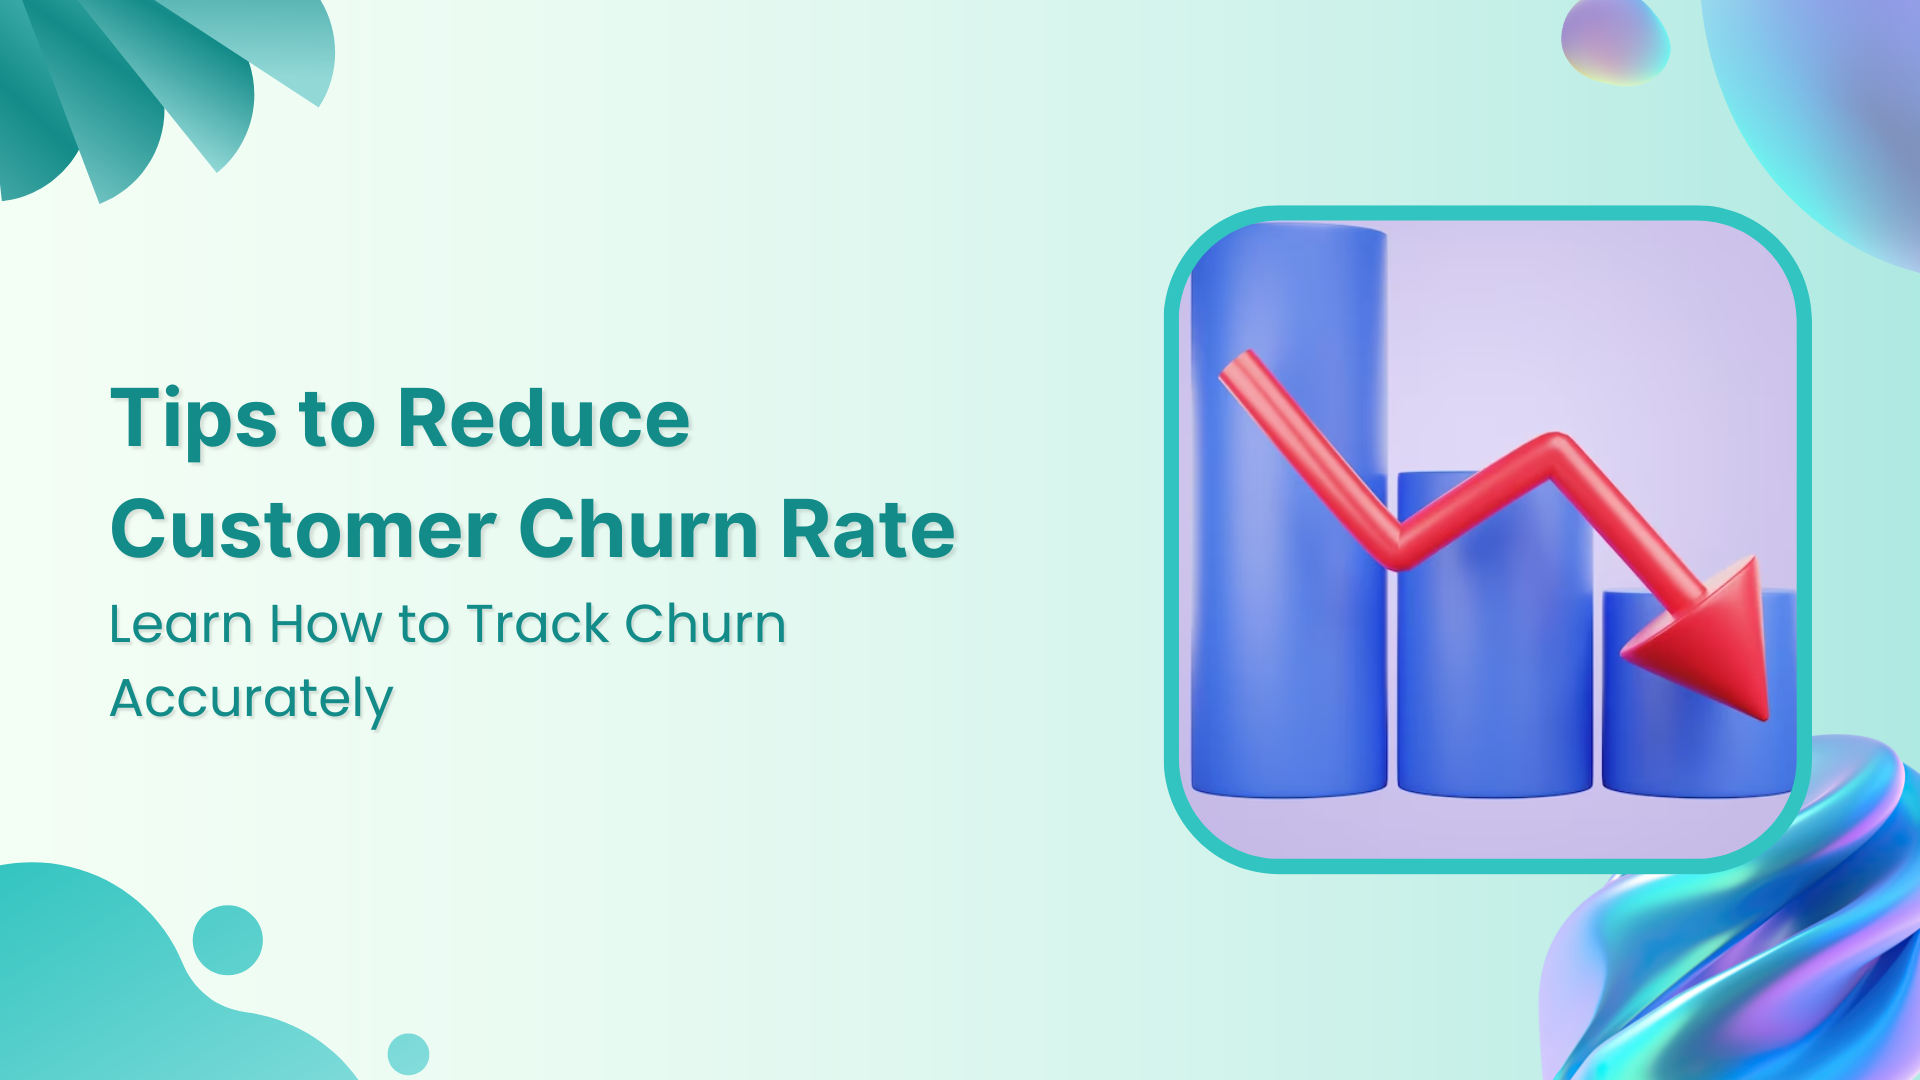 12 Tips to Reduce Your Customer Churn Rate